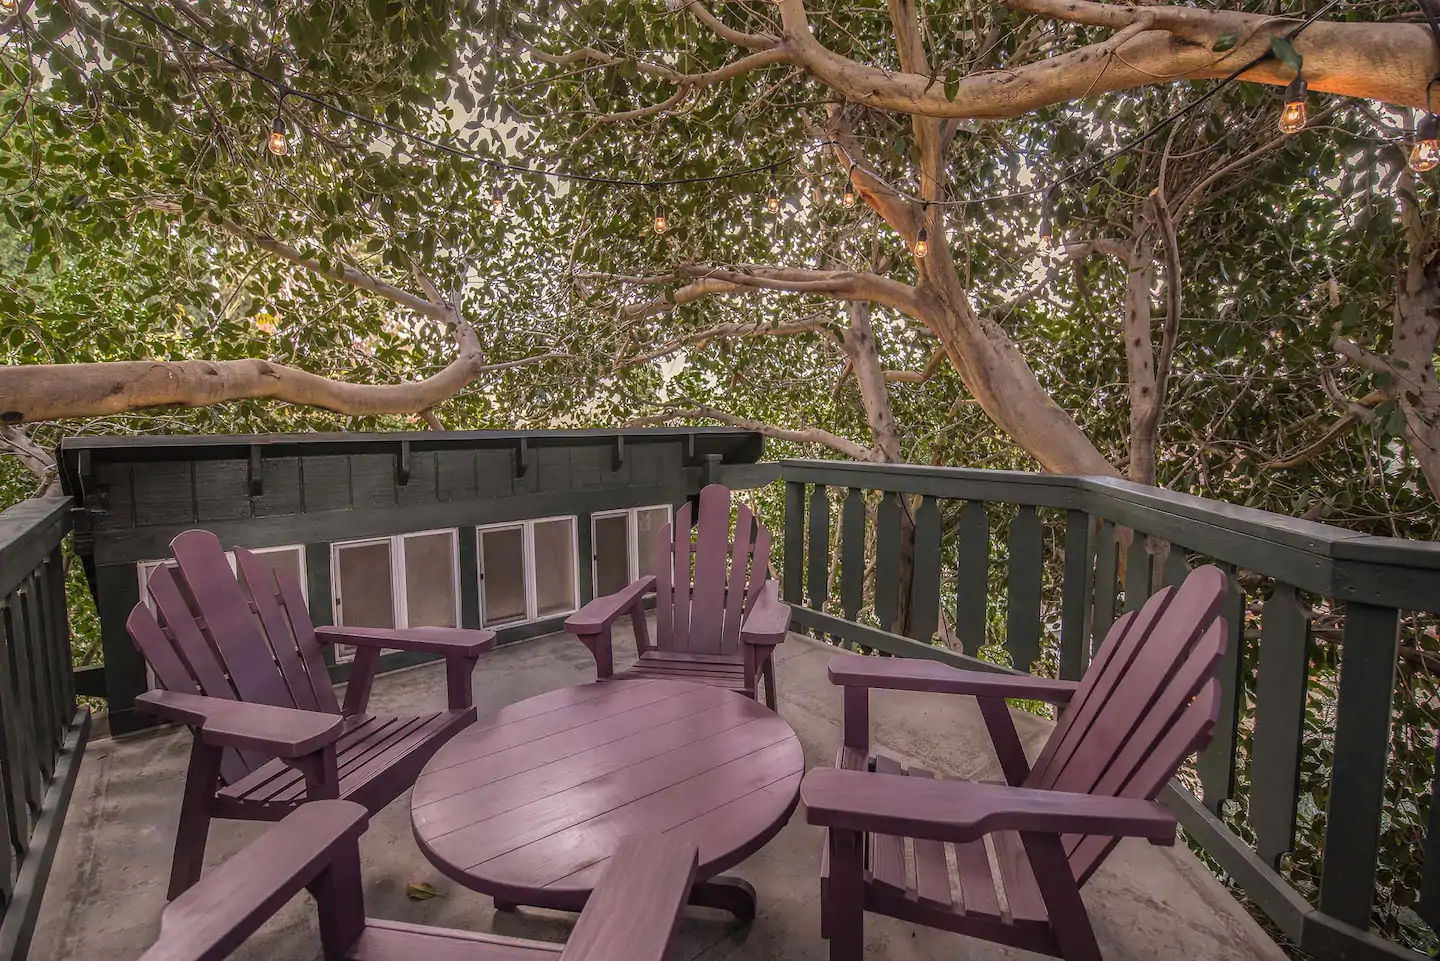 Awesome treehouse deck with outdoor table and chairs, decorated with bulb lights strung overhead.  At the terrific Treehouse Adventure Airbnb in California!